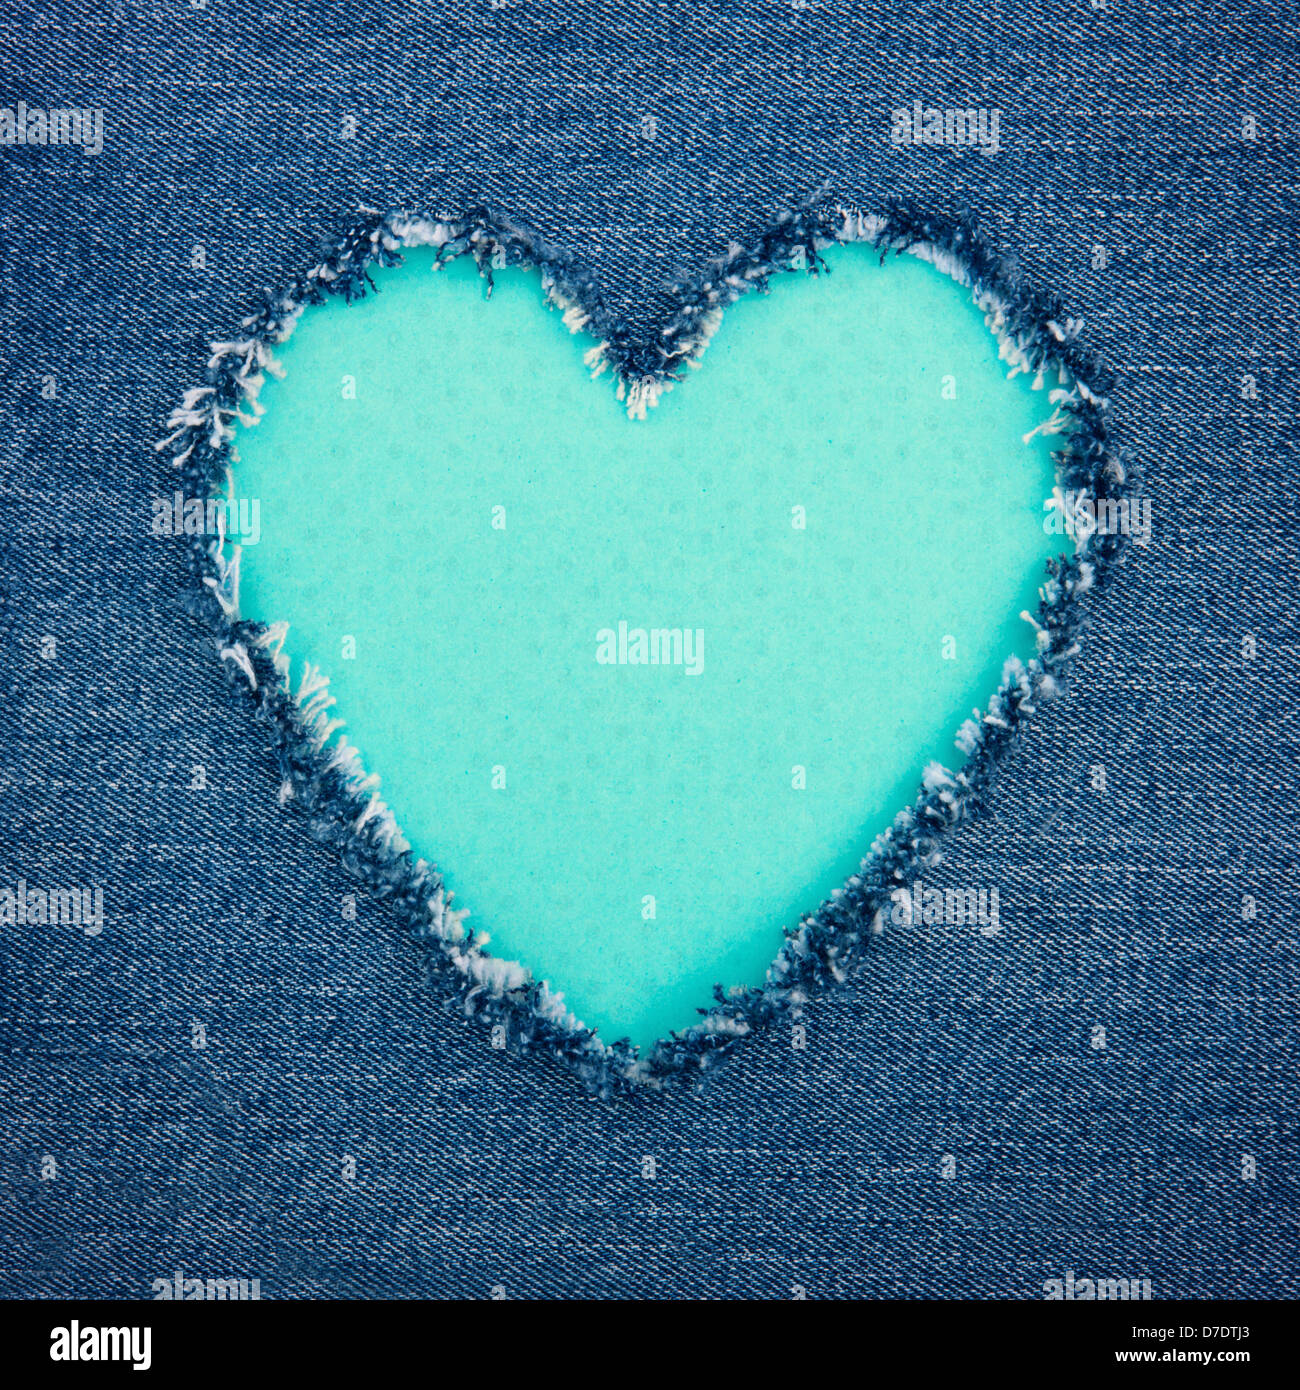 Blue vintage heart shape for copy space torn from denim jeans fabric, romantic love concept background Stock Photo